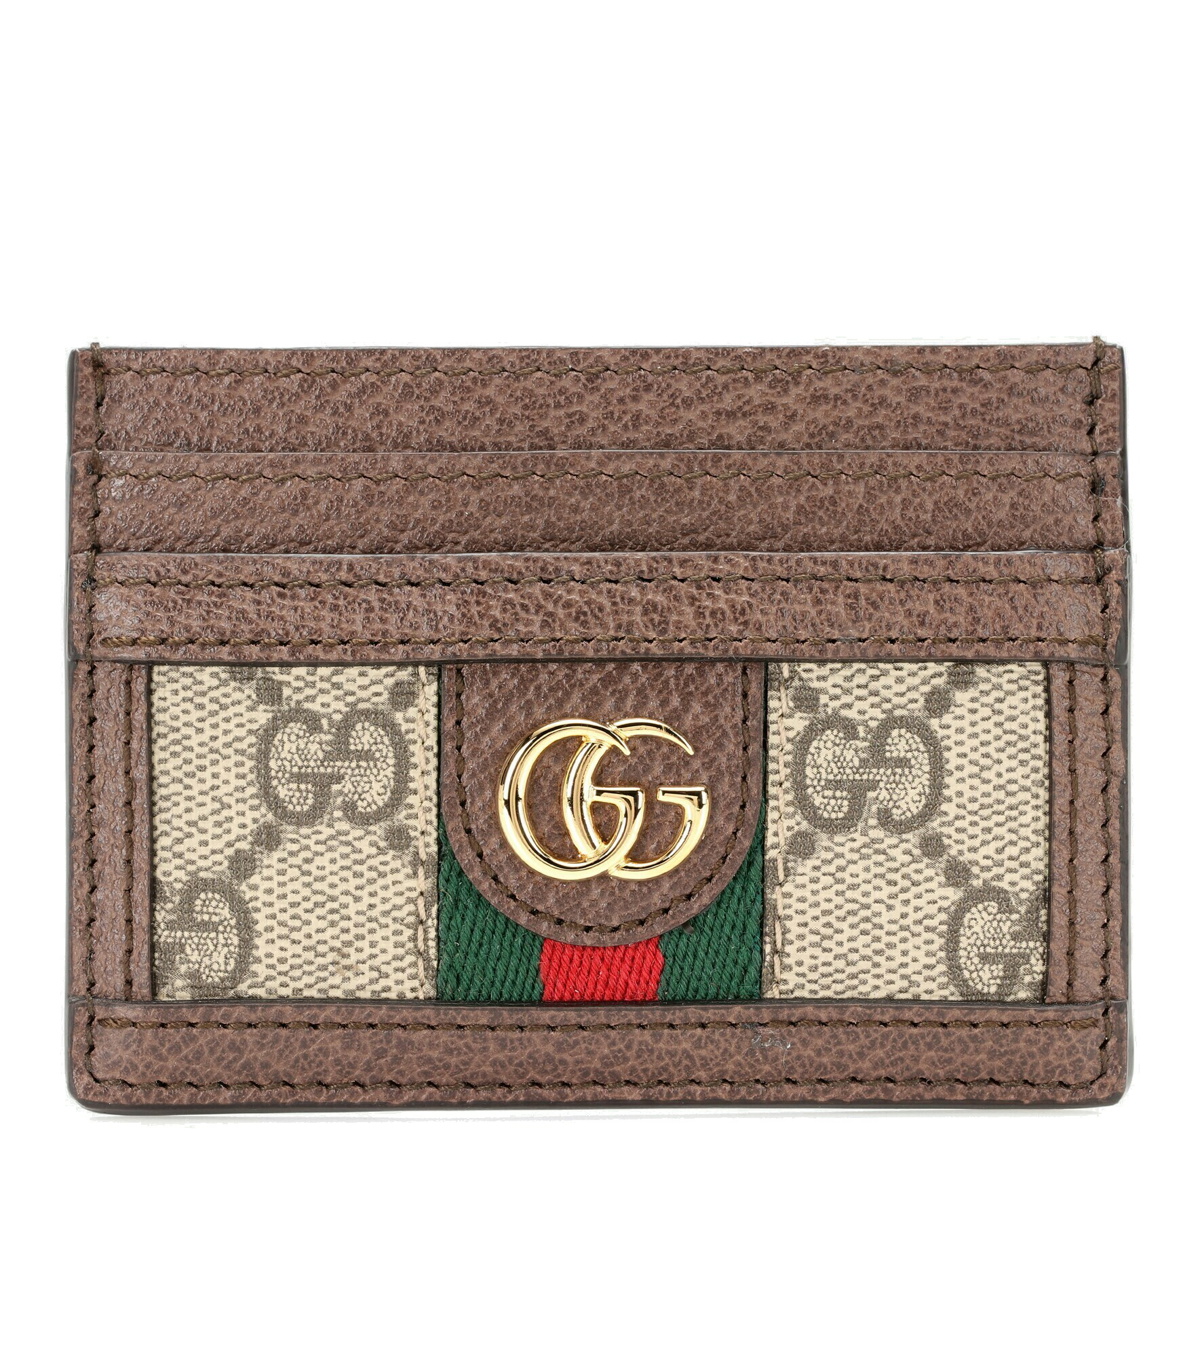 Gucci - Ophidia leather card holder Gucci